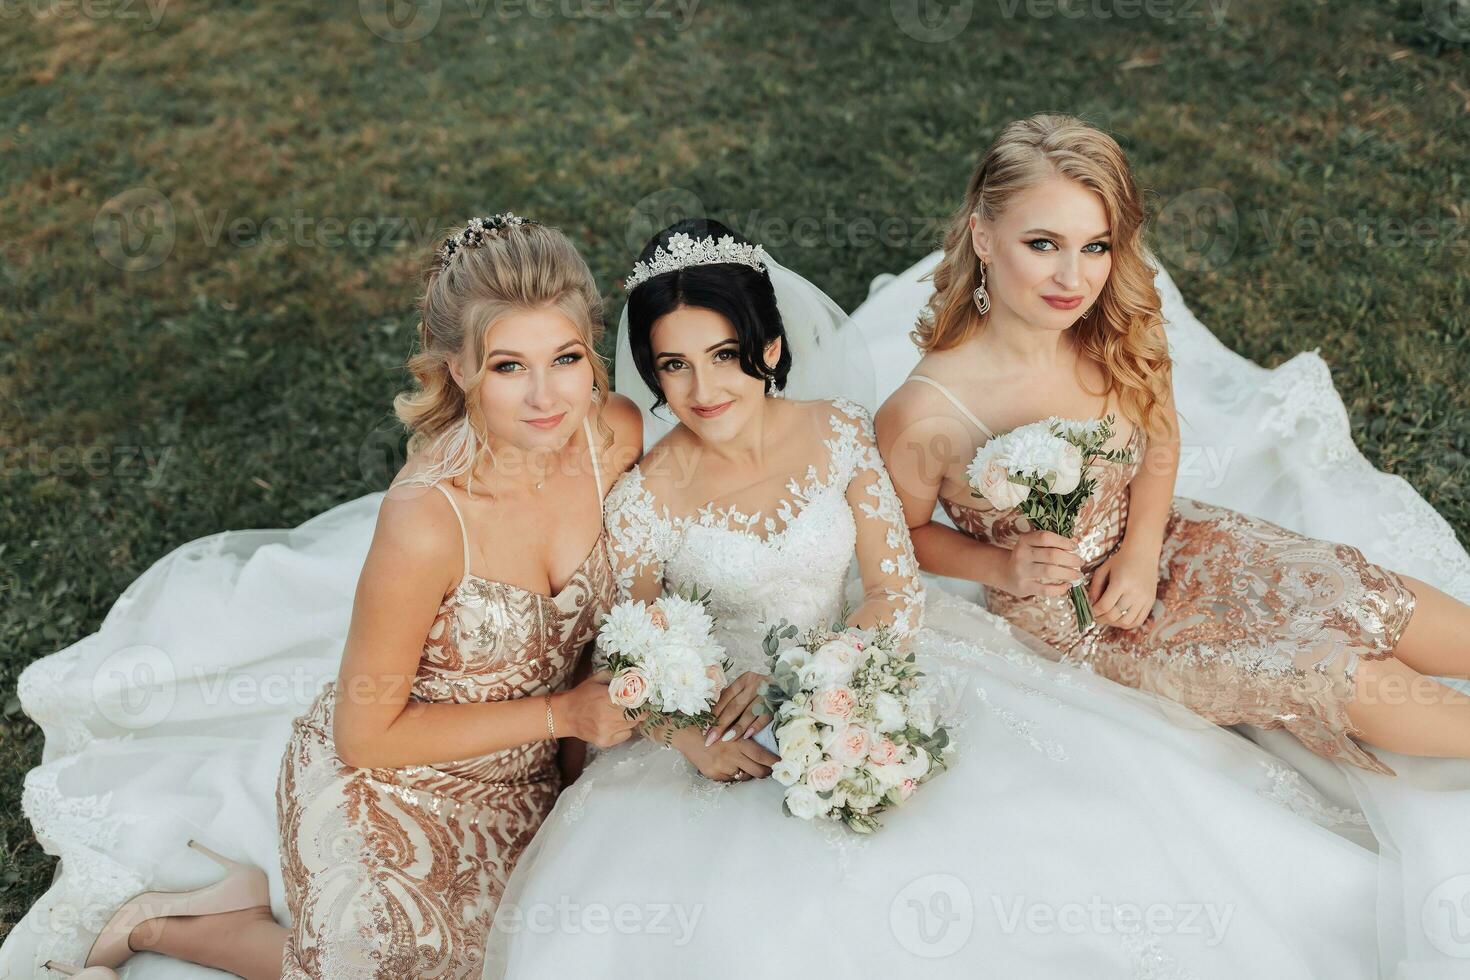 A brunette bride in a white elegant dress with a crown and her blonde friends in gold dresses pose with bouquets while sitting on the grass. Wedding portrait in nature, wedding photo in a light tone.